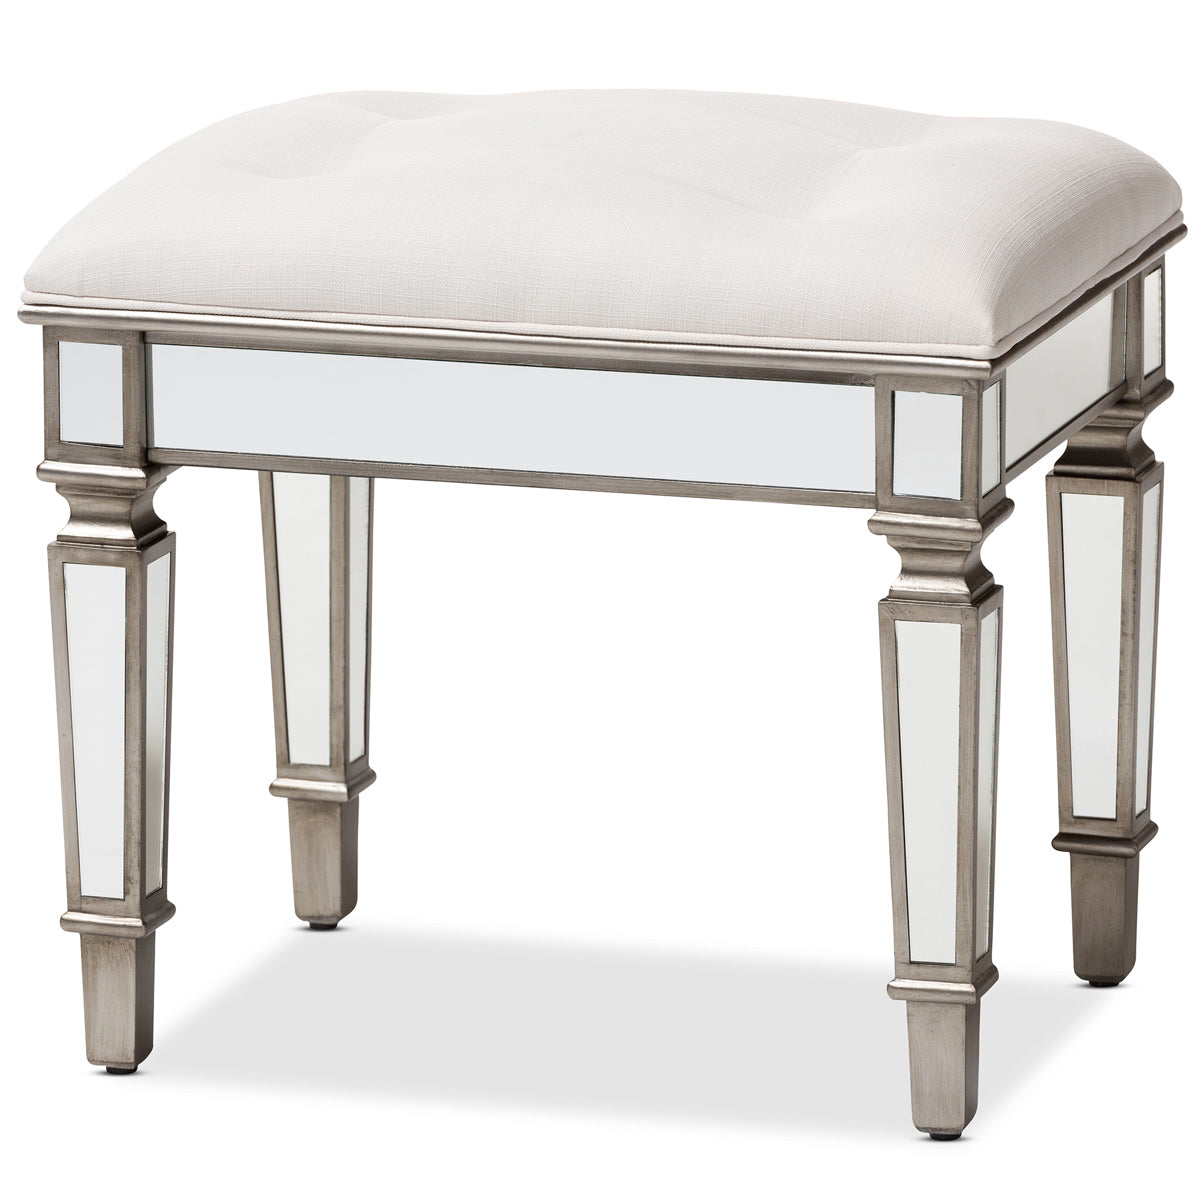 Baxton Studio Marielle Hollywood Regency Glamour Style Off White Fabric Upholstered Mirrored Ottoman Vanity Bench Baxton Studio-ottomans-Minimal And Modern - 1